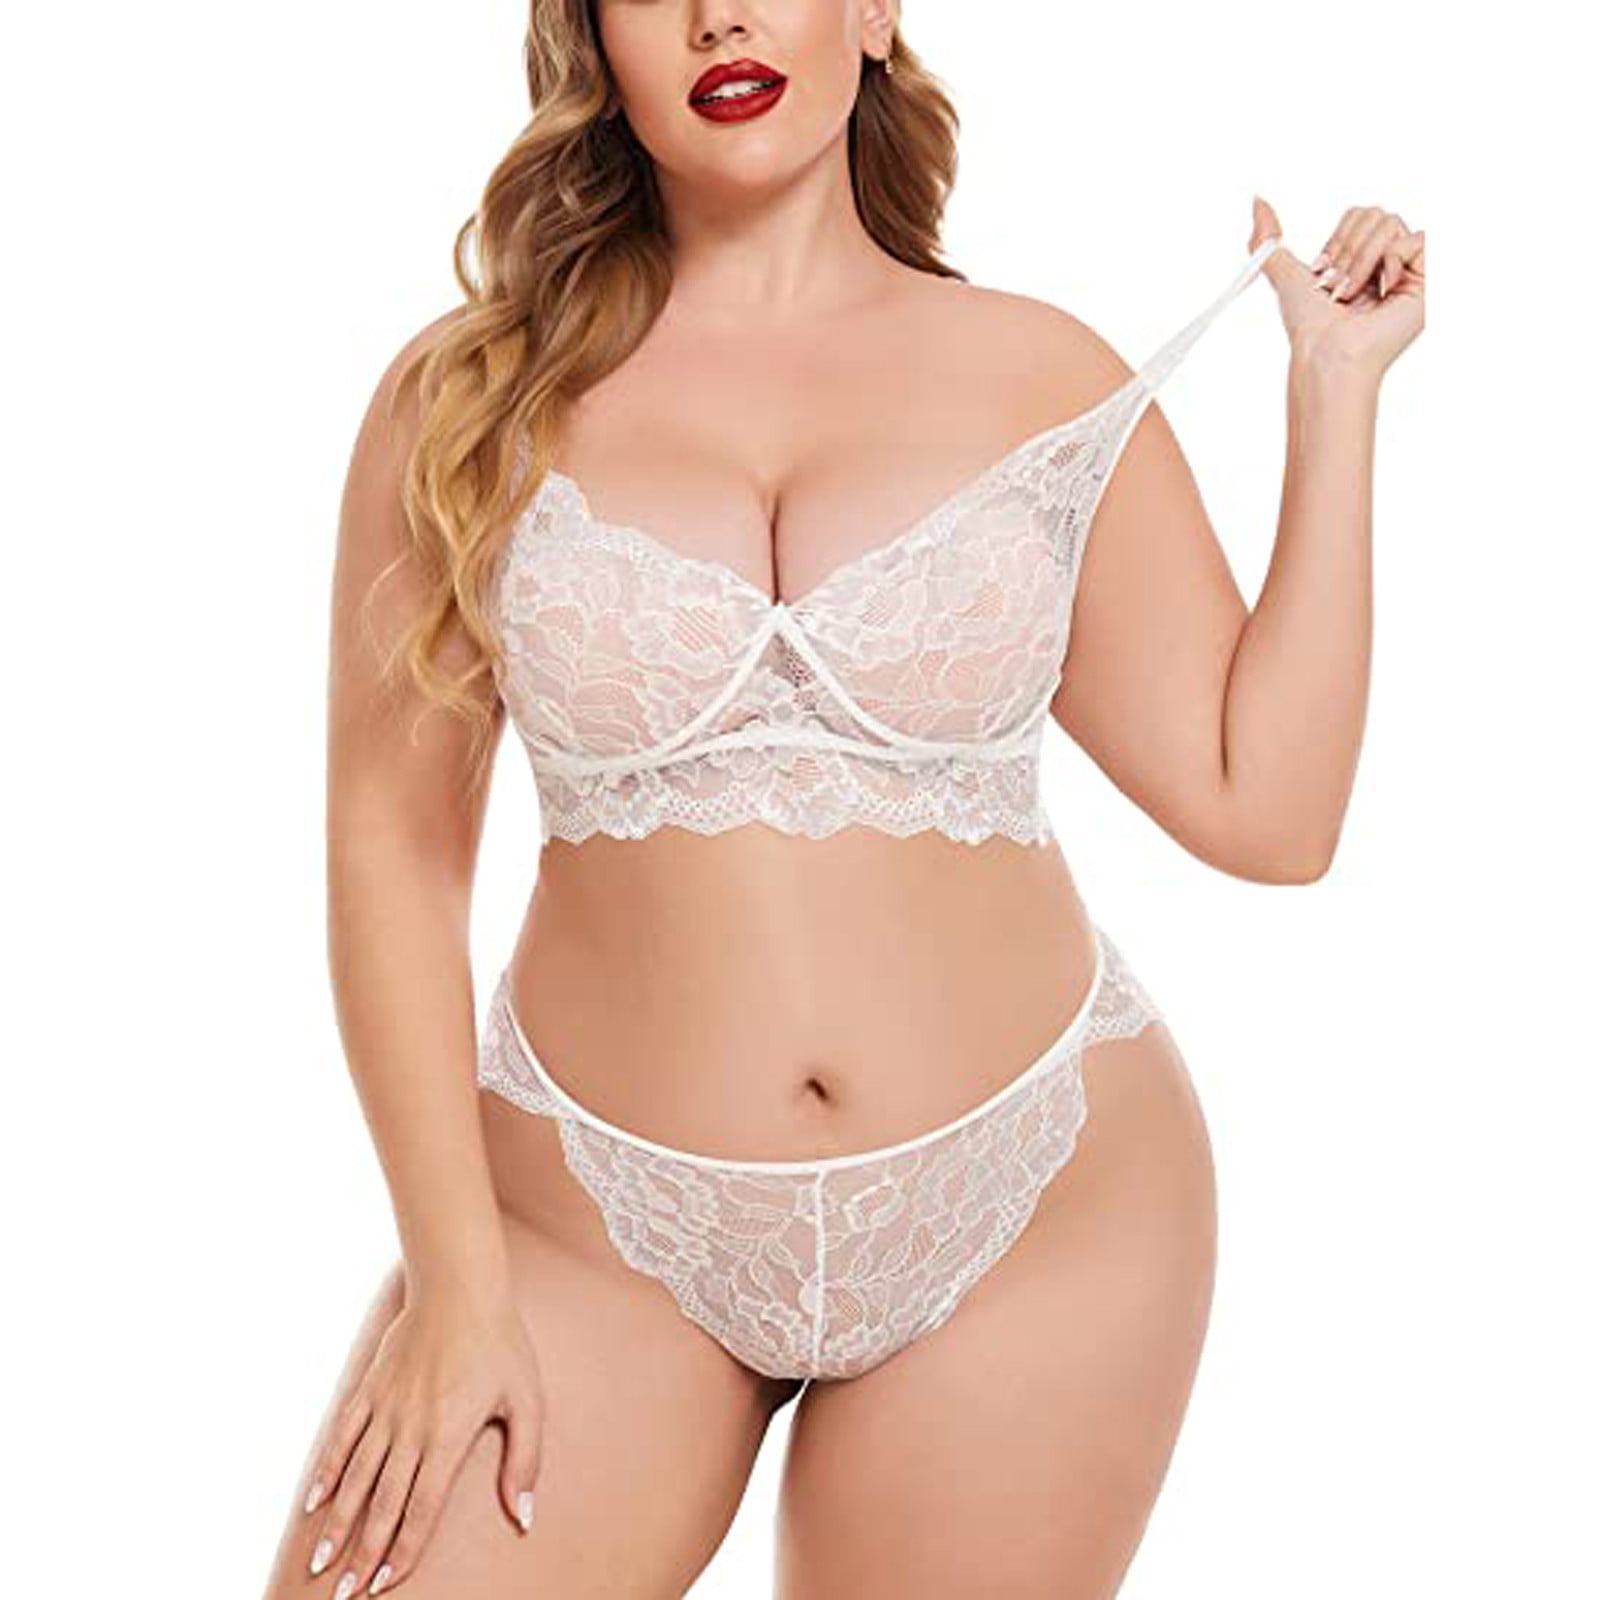 Xihbxyly Qonioi Clearance Lingerie for Women 2 Piece Set Lingerie for Women  Plus Size 2 Piece Sexy Lace Strap Bralette Bra and Panty Lingerie Set Push  Up Bra and Panty Sets for Women #5 